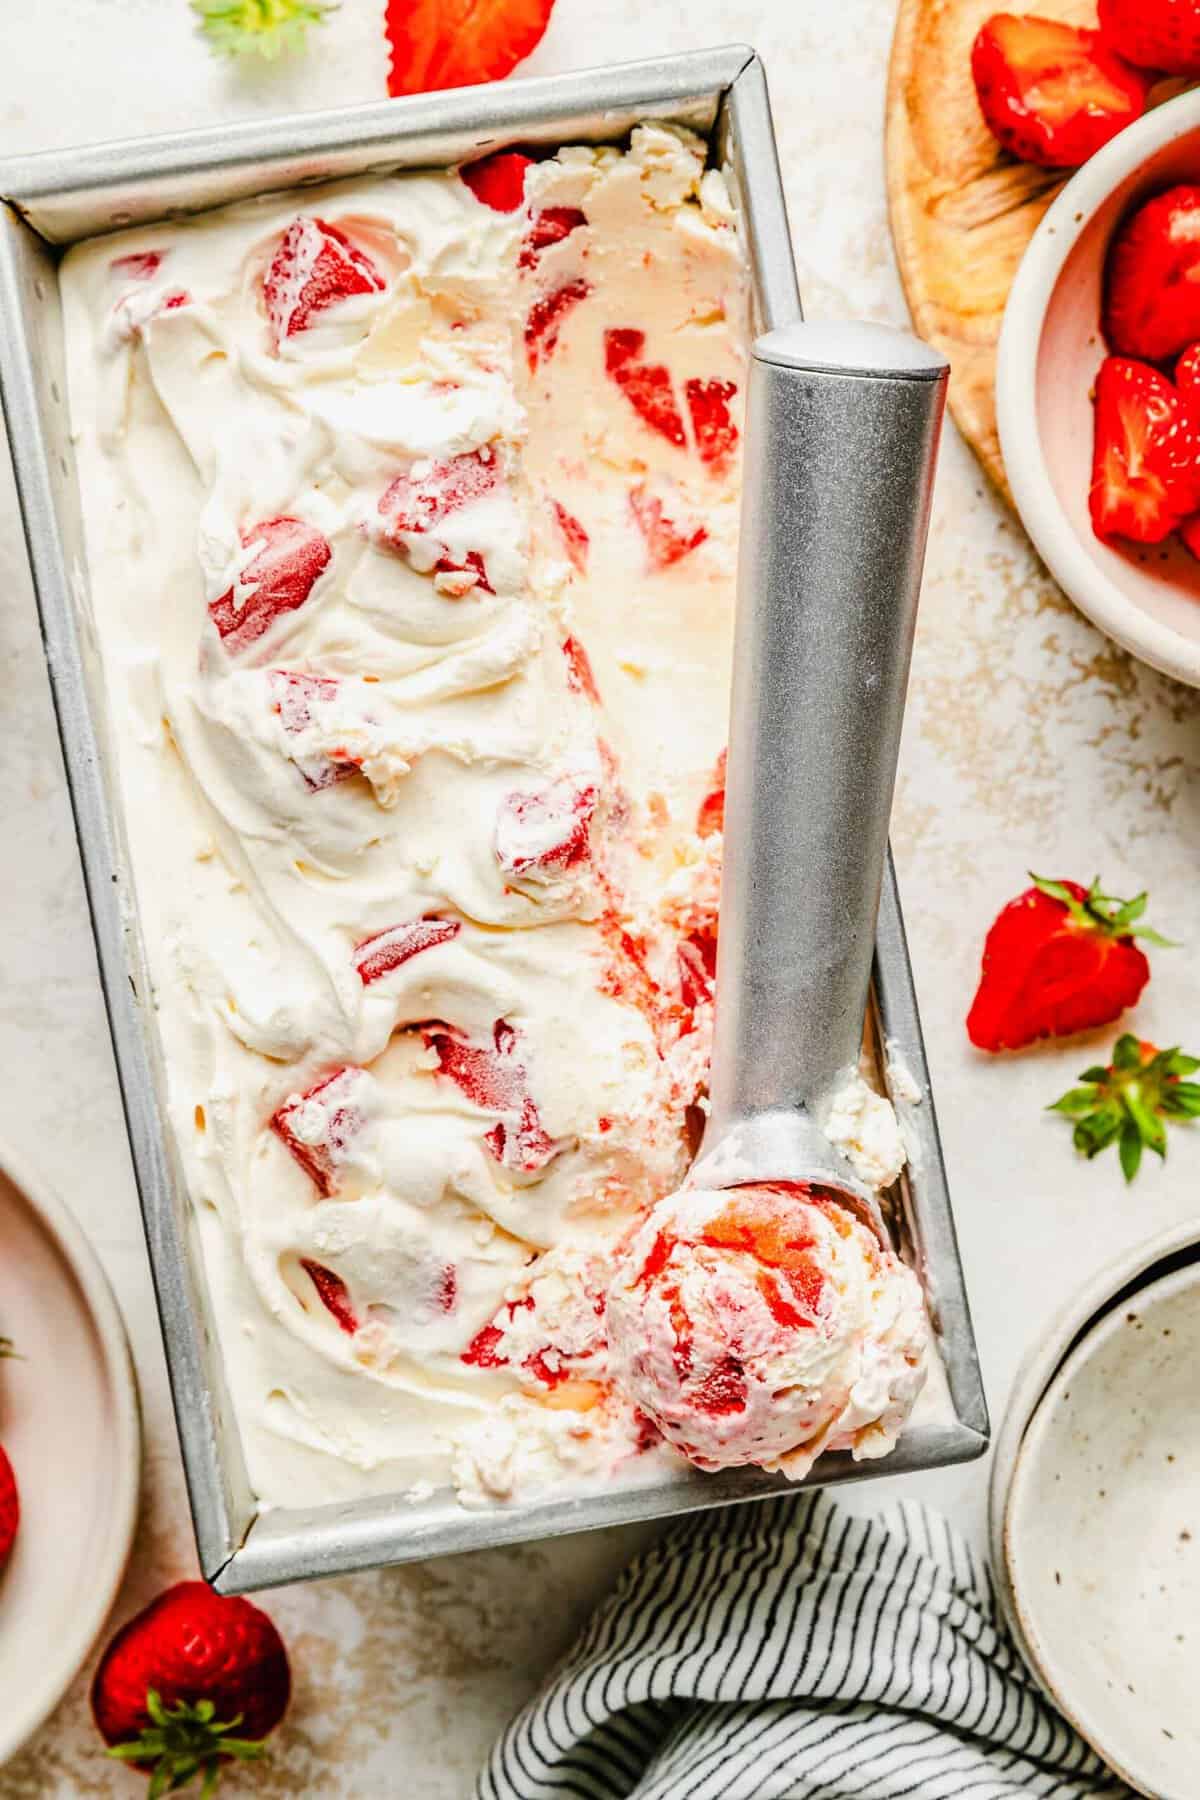 Taking a scoop of homemade strawberry ice cream out of a loaf pan.